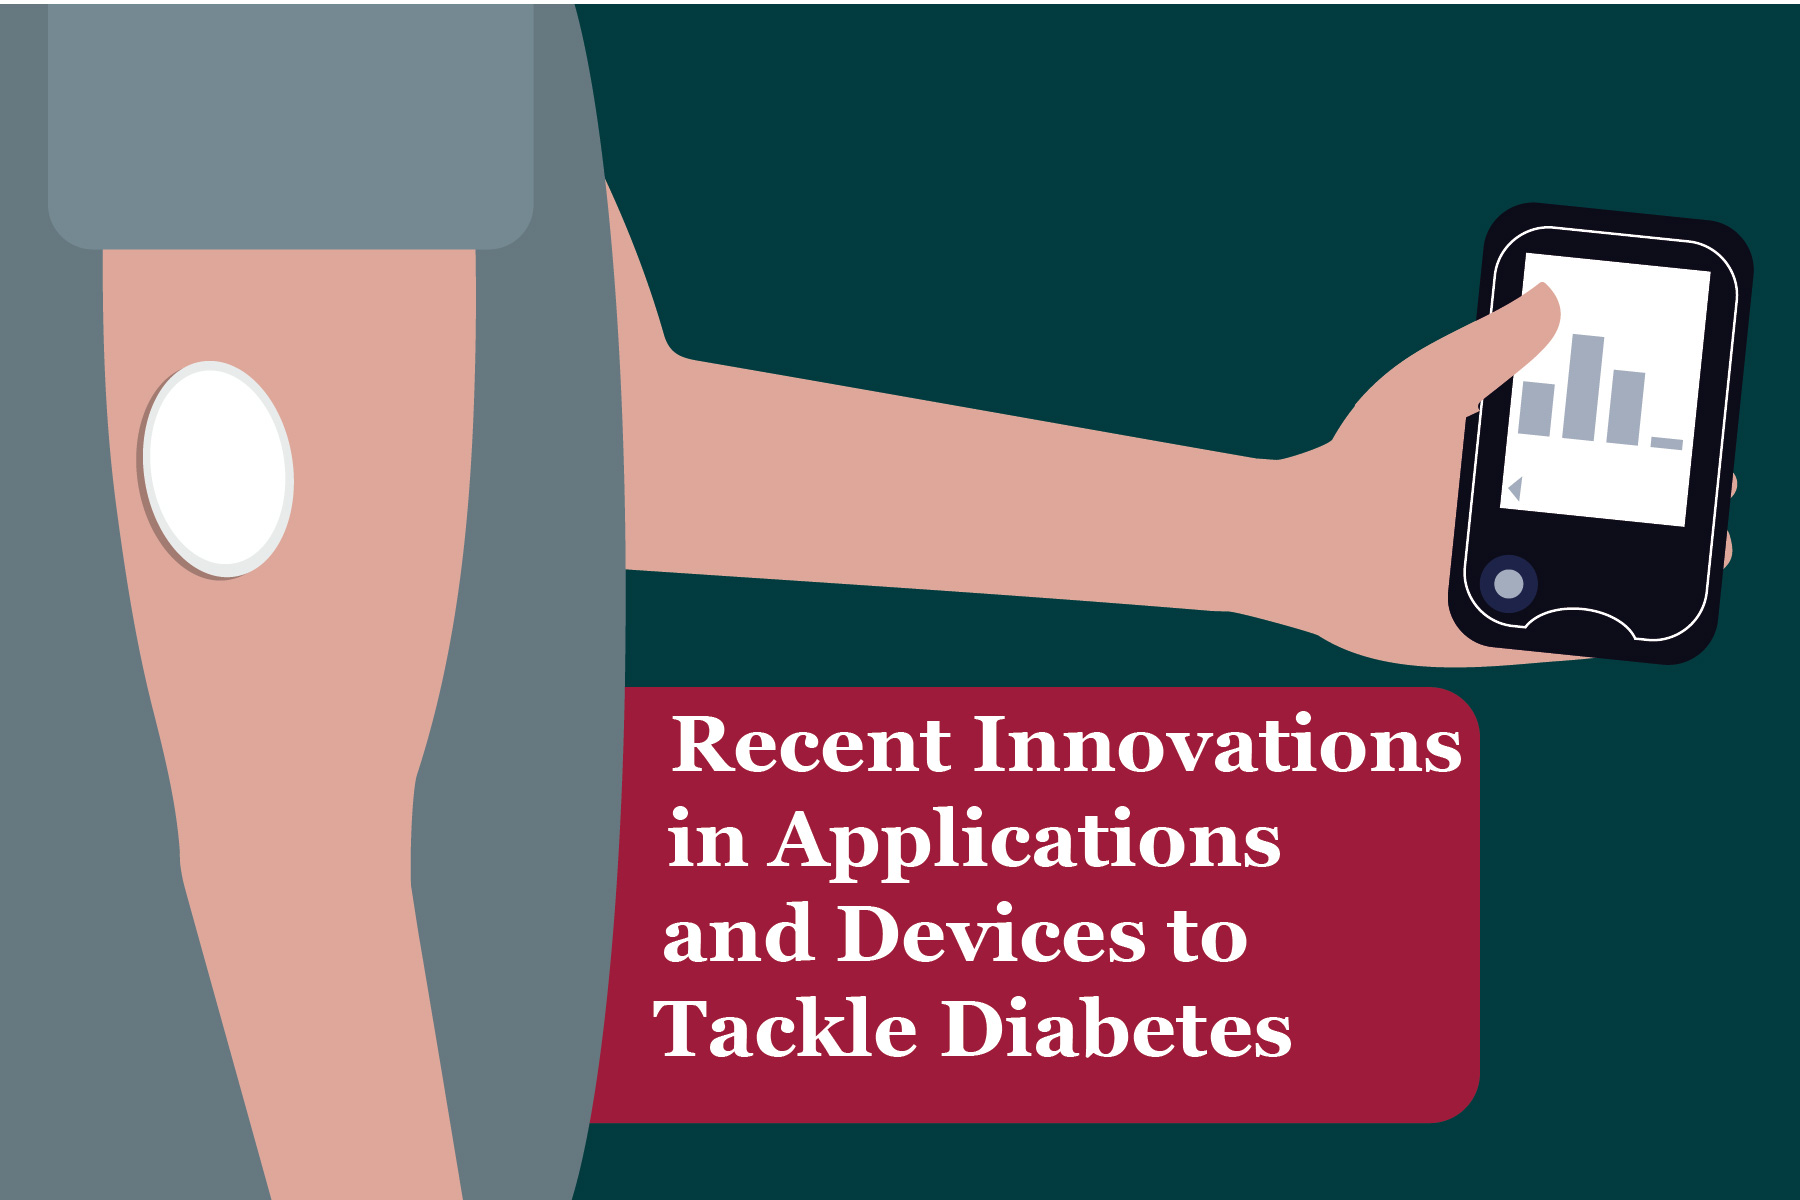 Recent Innovations in Applications and Devices to Tackle Diabetes